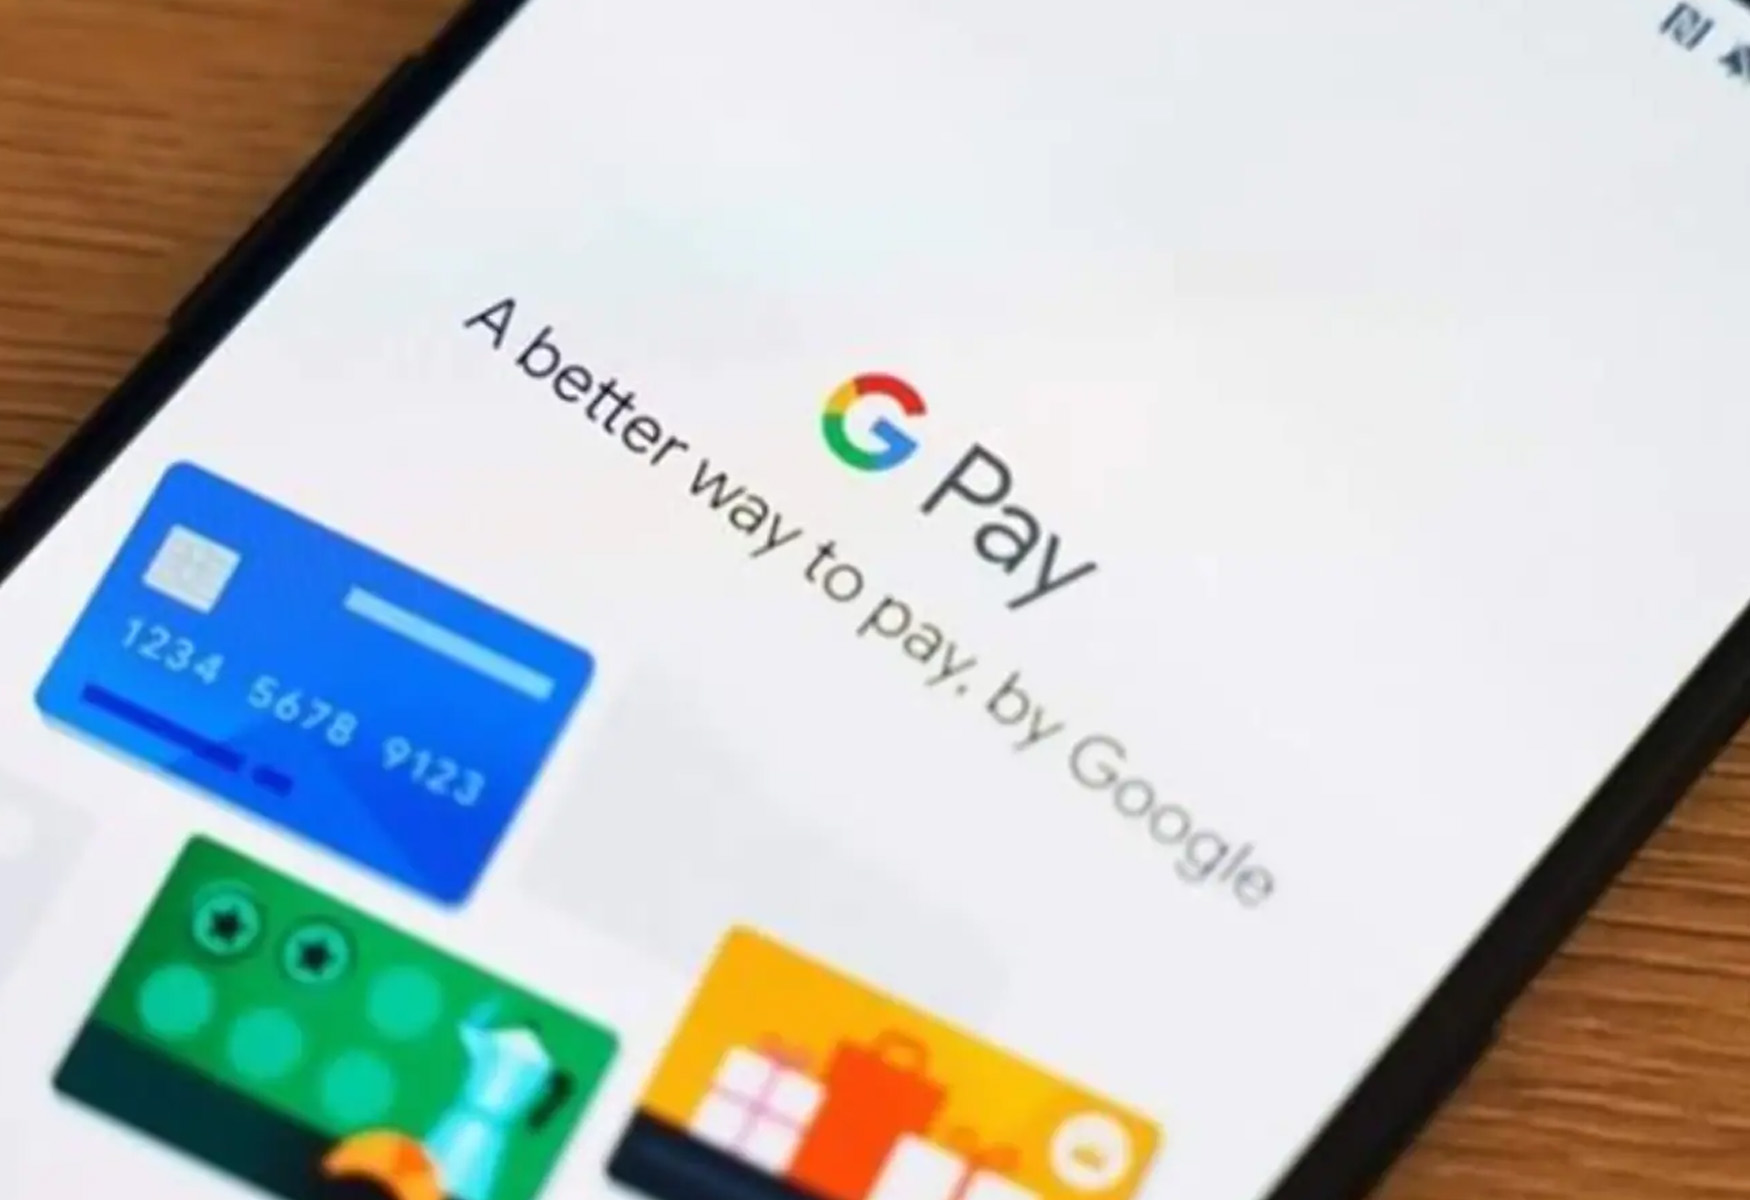 Google Expands Lending Services In India Through Google Pay